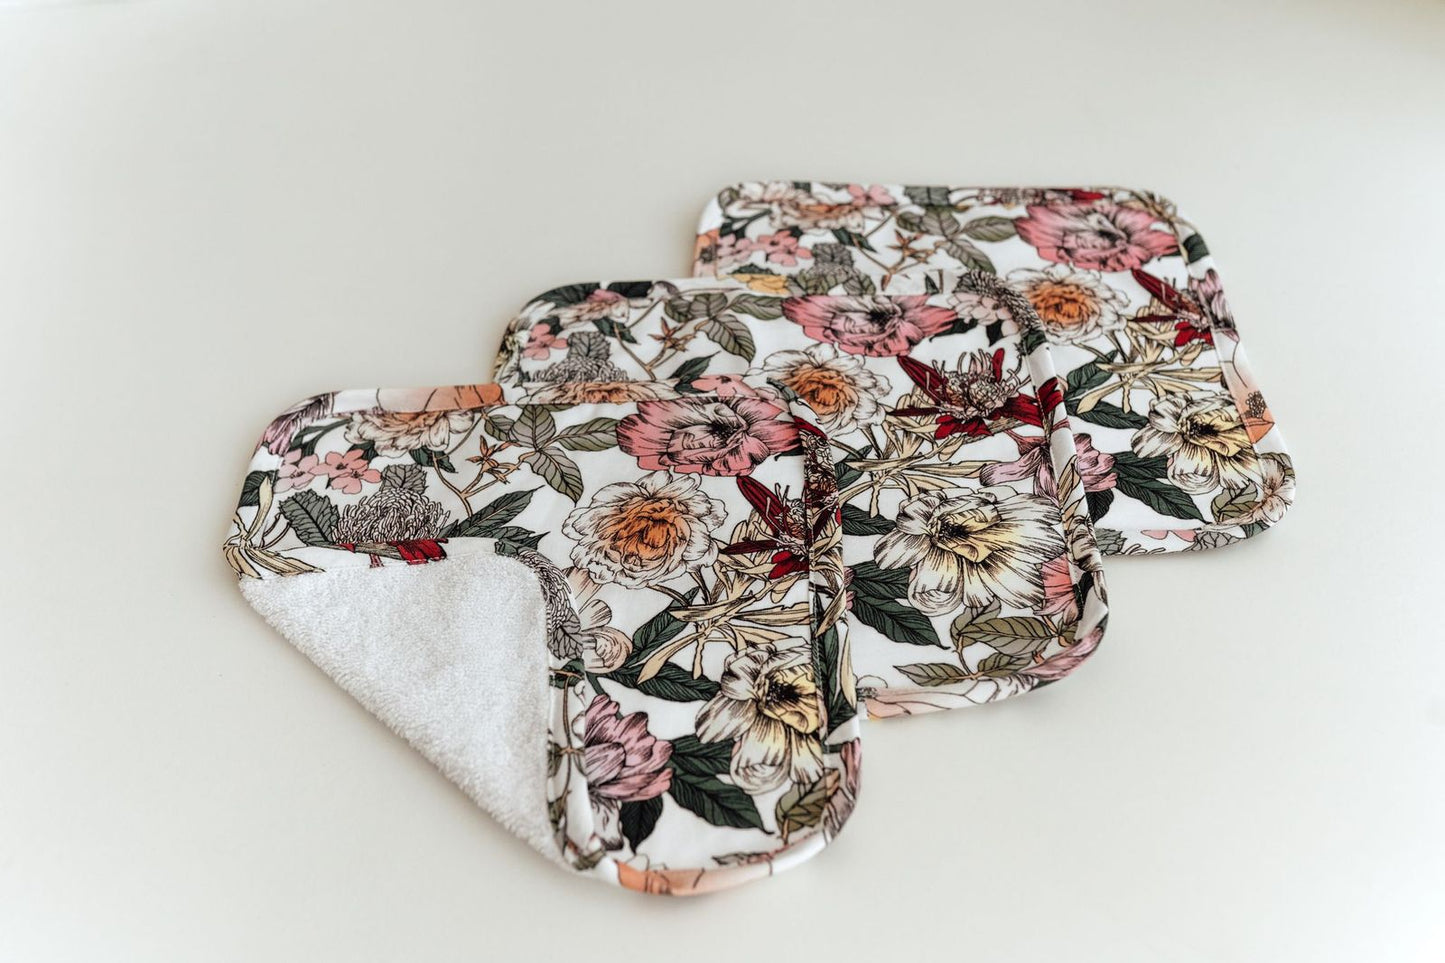 These beautiful organic face and body cloths in our Australiana print are perfect for baby, toddler and also for grownups. They make a great face and beauty cloth and means Mum, or Dad, can enjoy a little bit of Snuggle Hunny too! They will brighten up any bathroom with our bright prints.